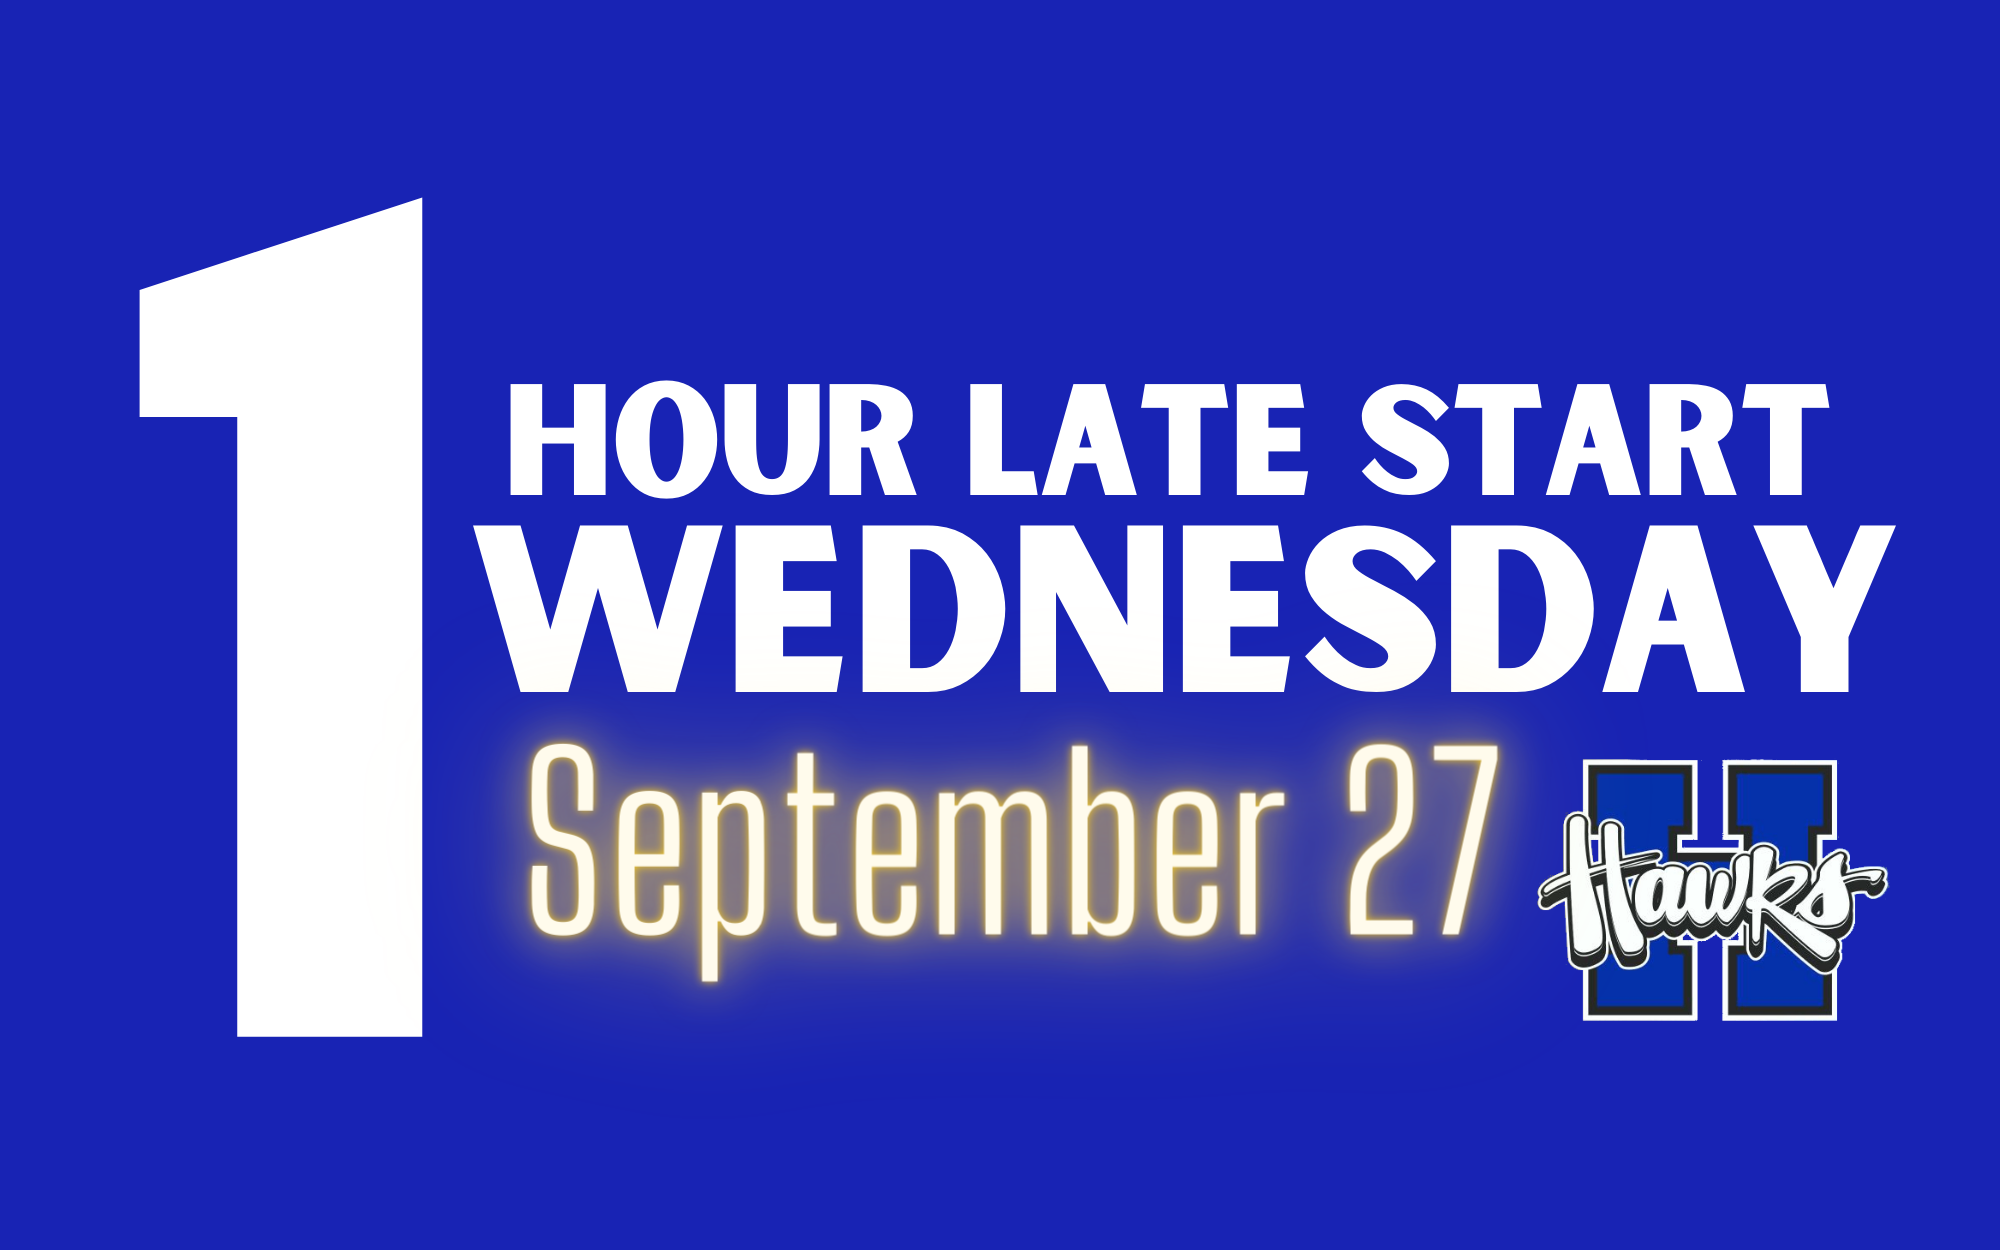 late start wed 9/27